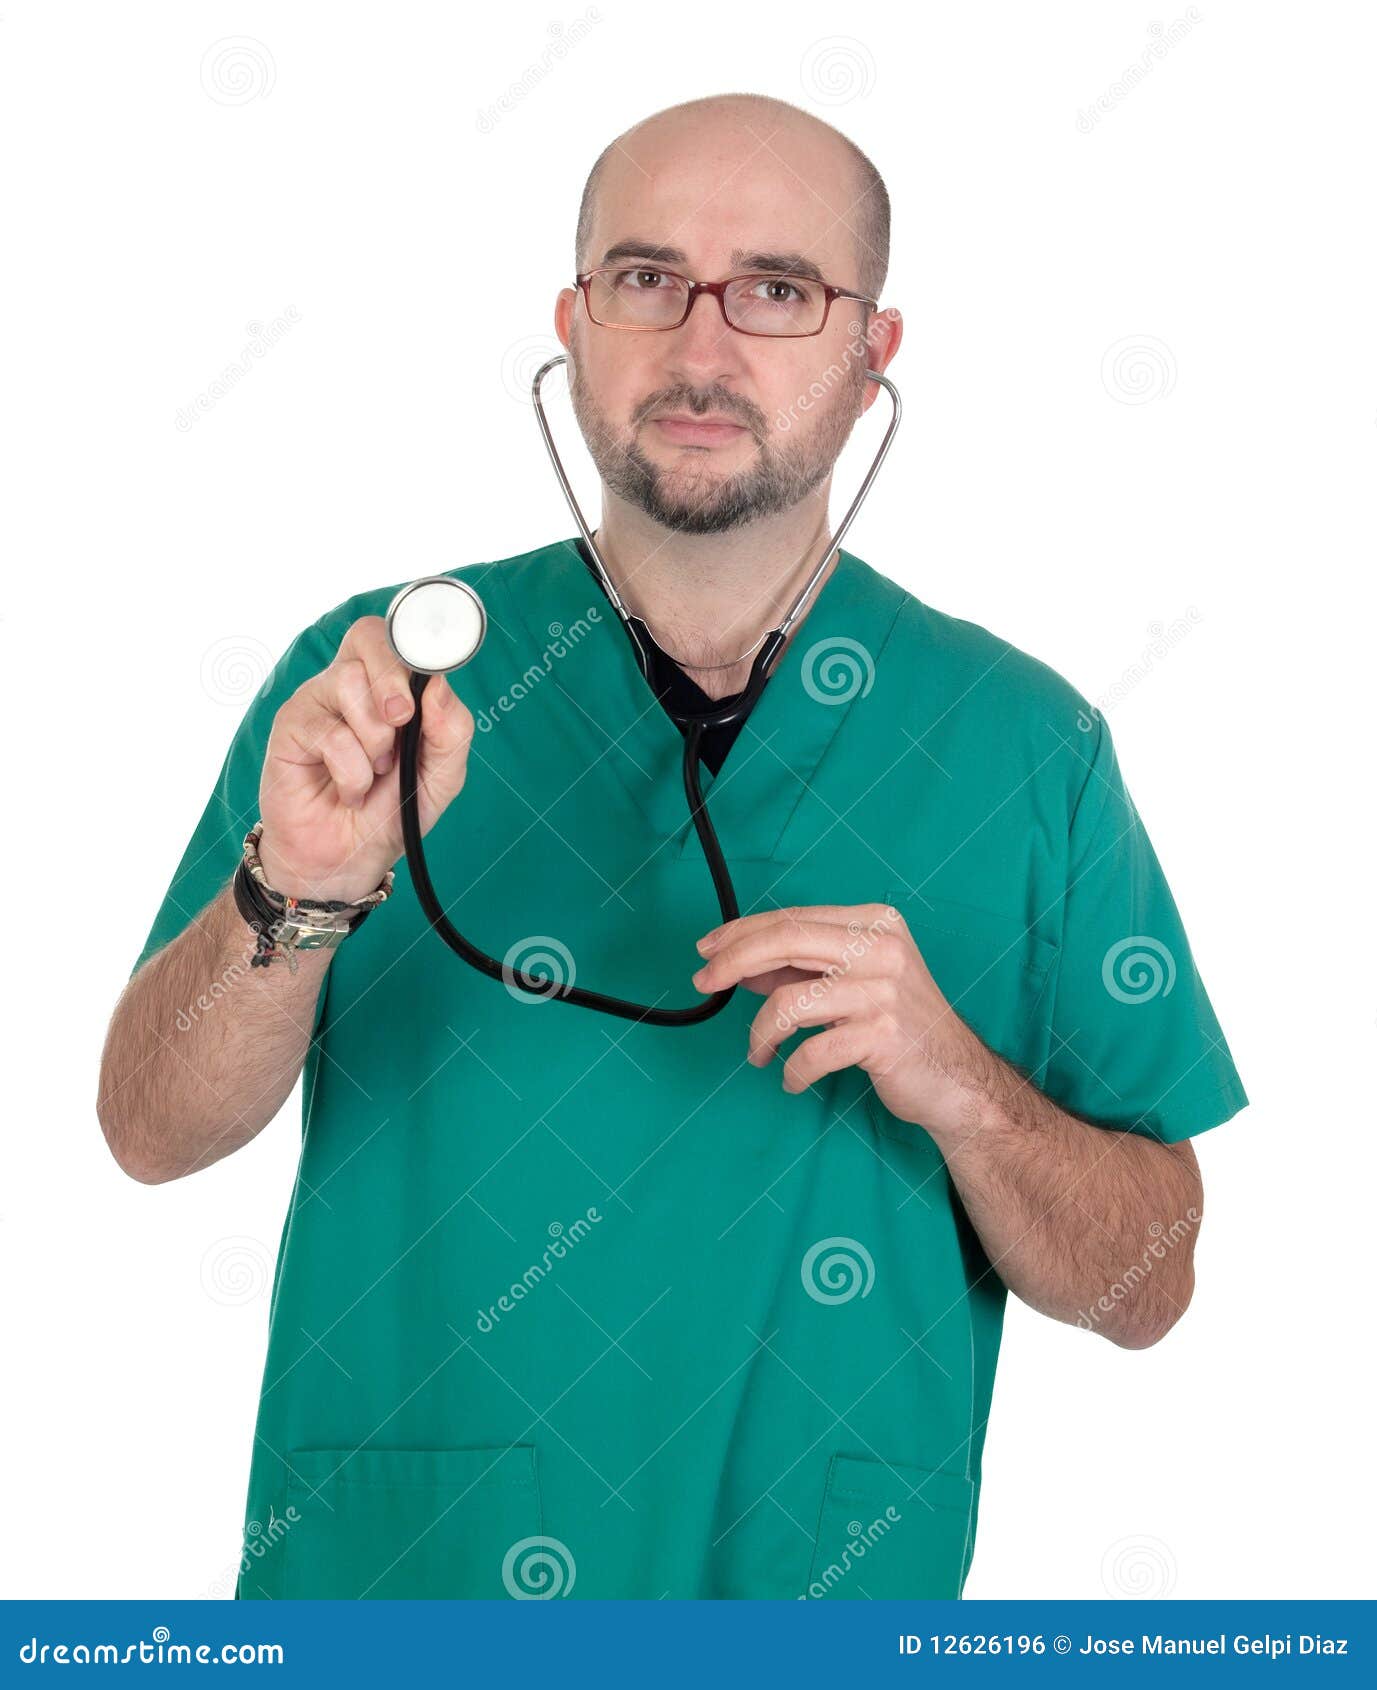 Top 101+ Images what are doctors listening for with a stethoscope Sharp